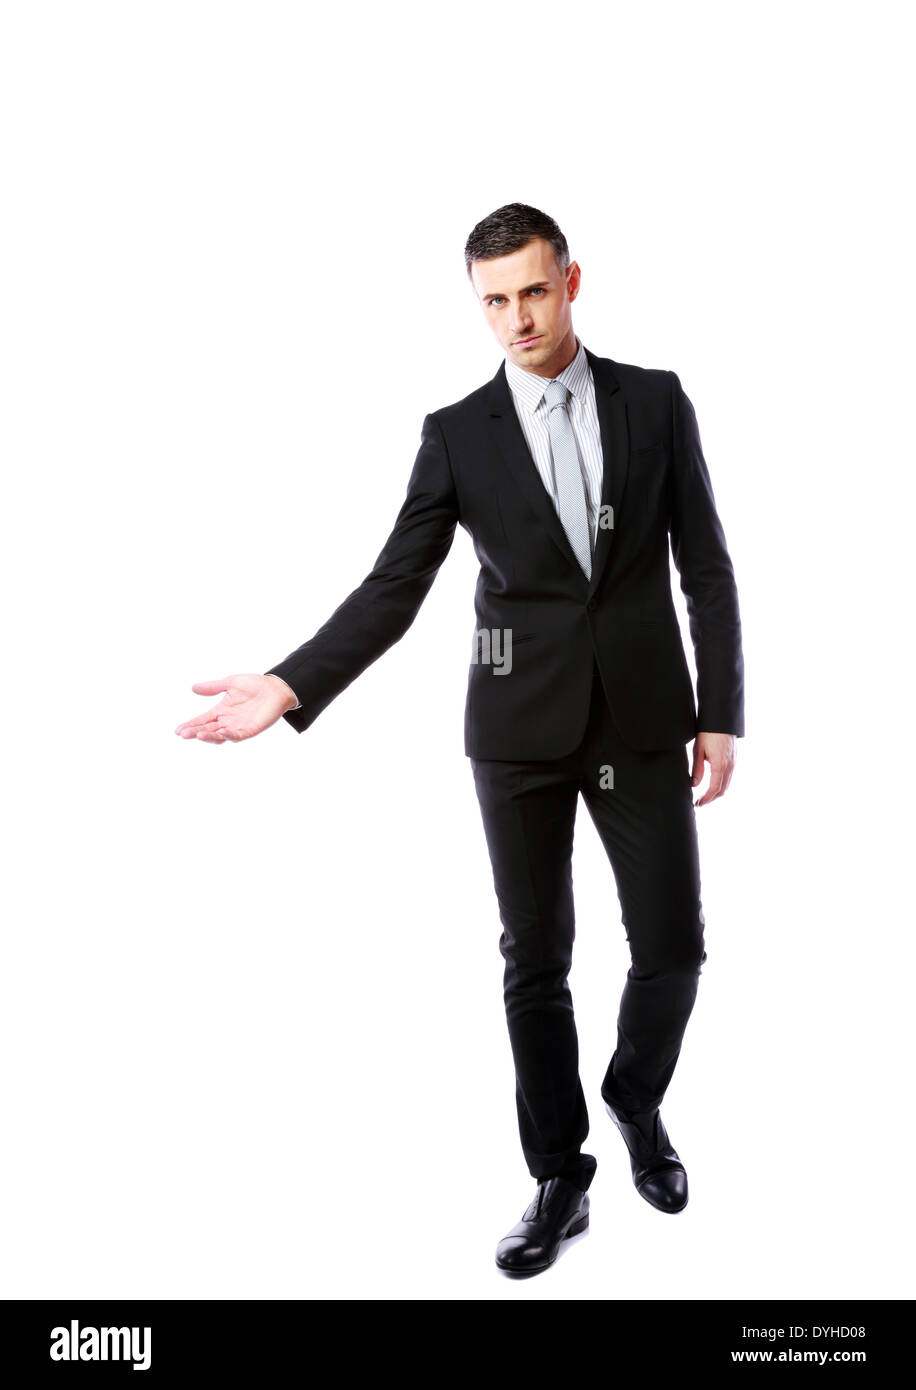 Confident businessman gesturing isolated on a white background Stock Photo